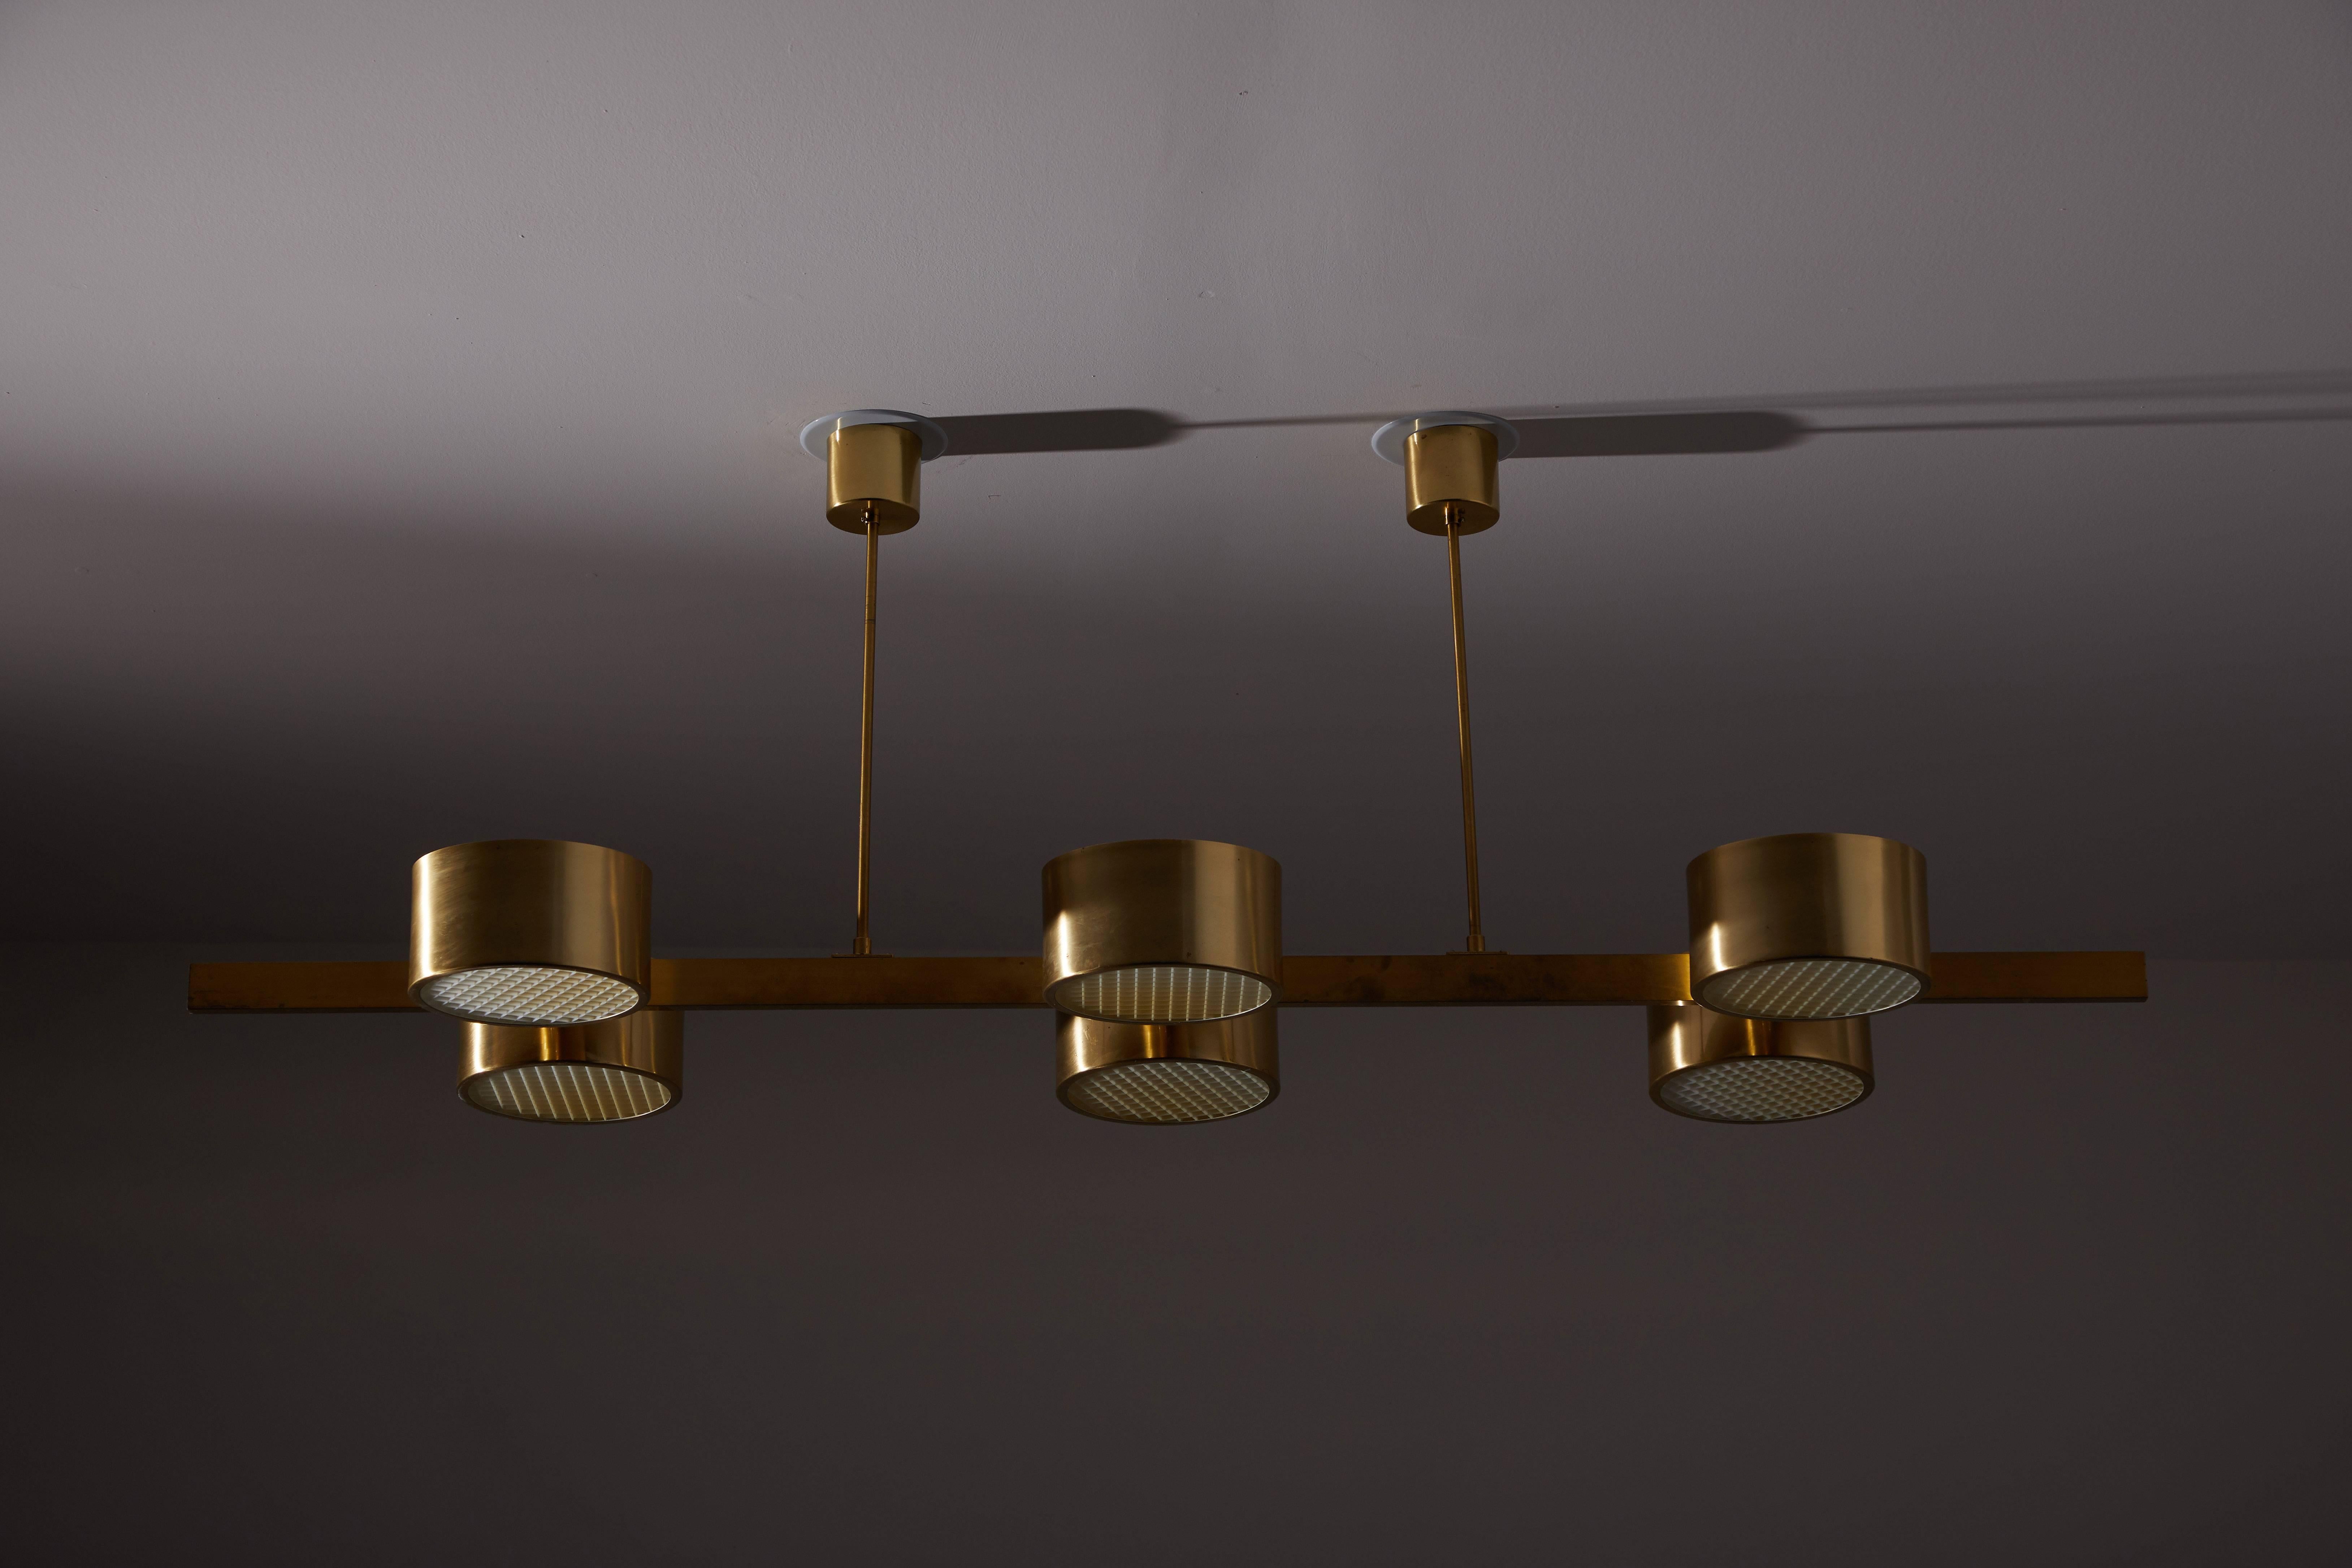 Rare six-shade chandelier by Hans-Agne Jakobsson. Designed and manufactured in Sweden, circa 1970s. Rewired for US junction boxes. Custom ceiling plates. Brass, with glass diffusers and acrylic grid covers on diffusers. Takes Six E27 40w maximum